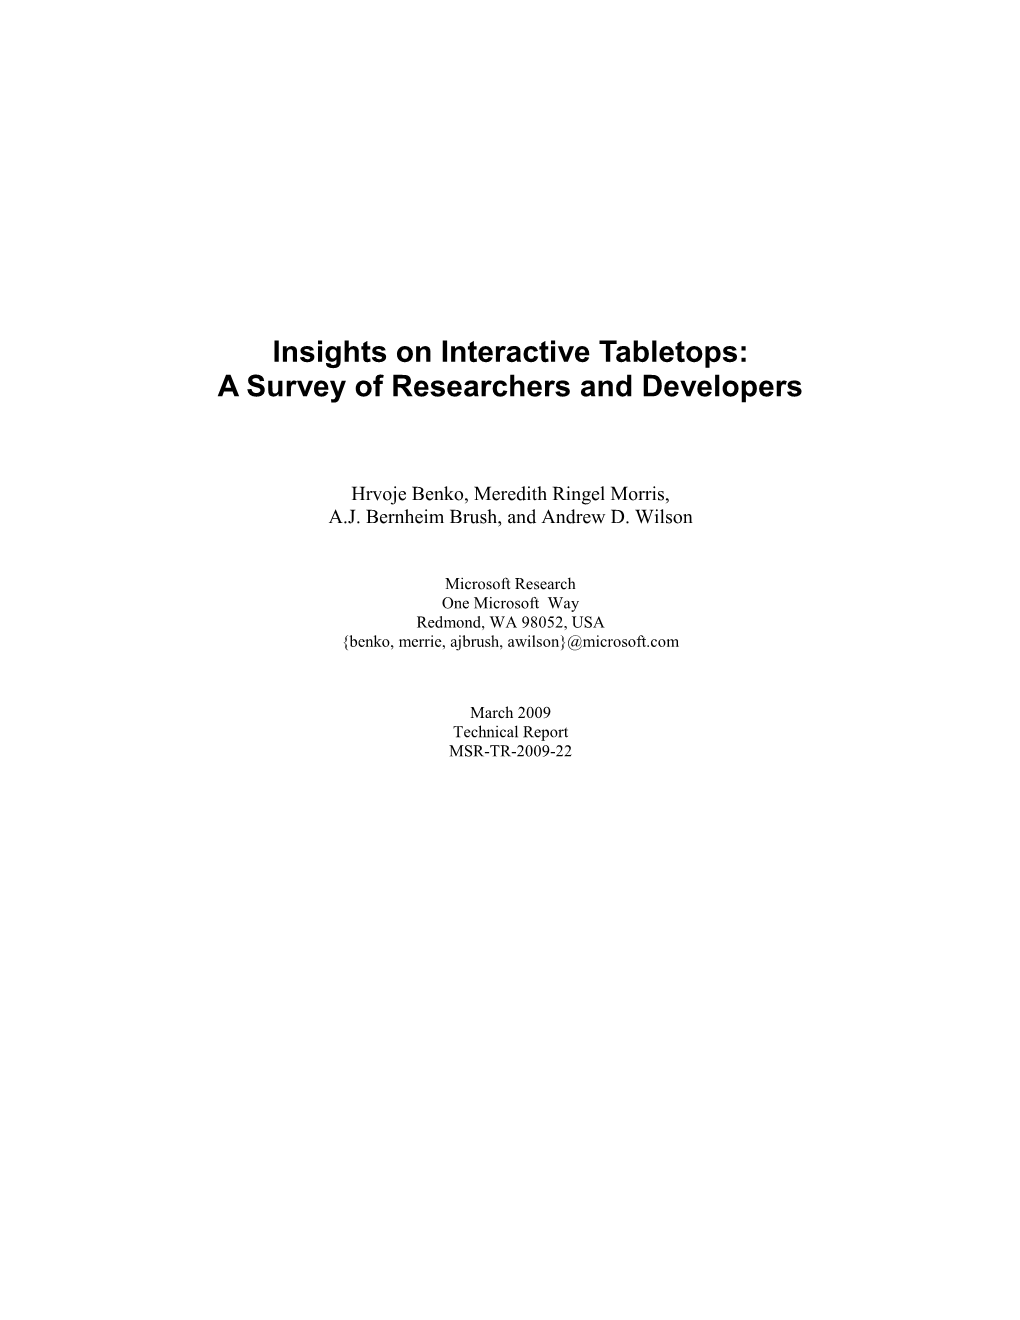 Insights on Interactive Tabletops: a Survey of Researchers and Developers